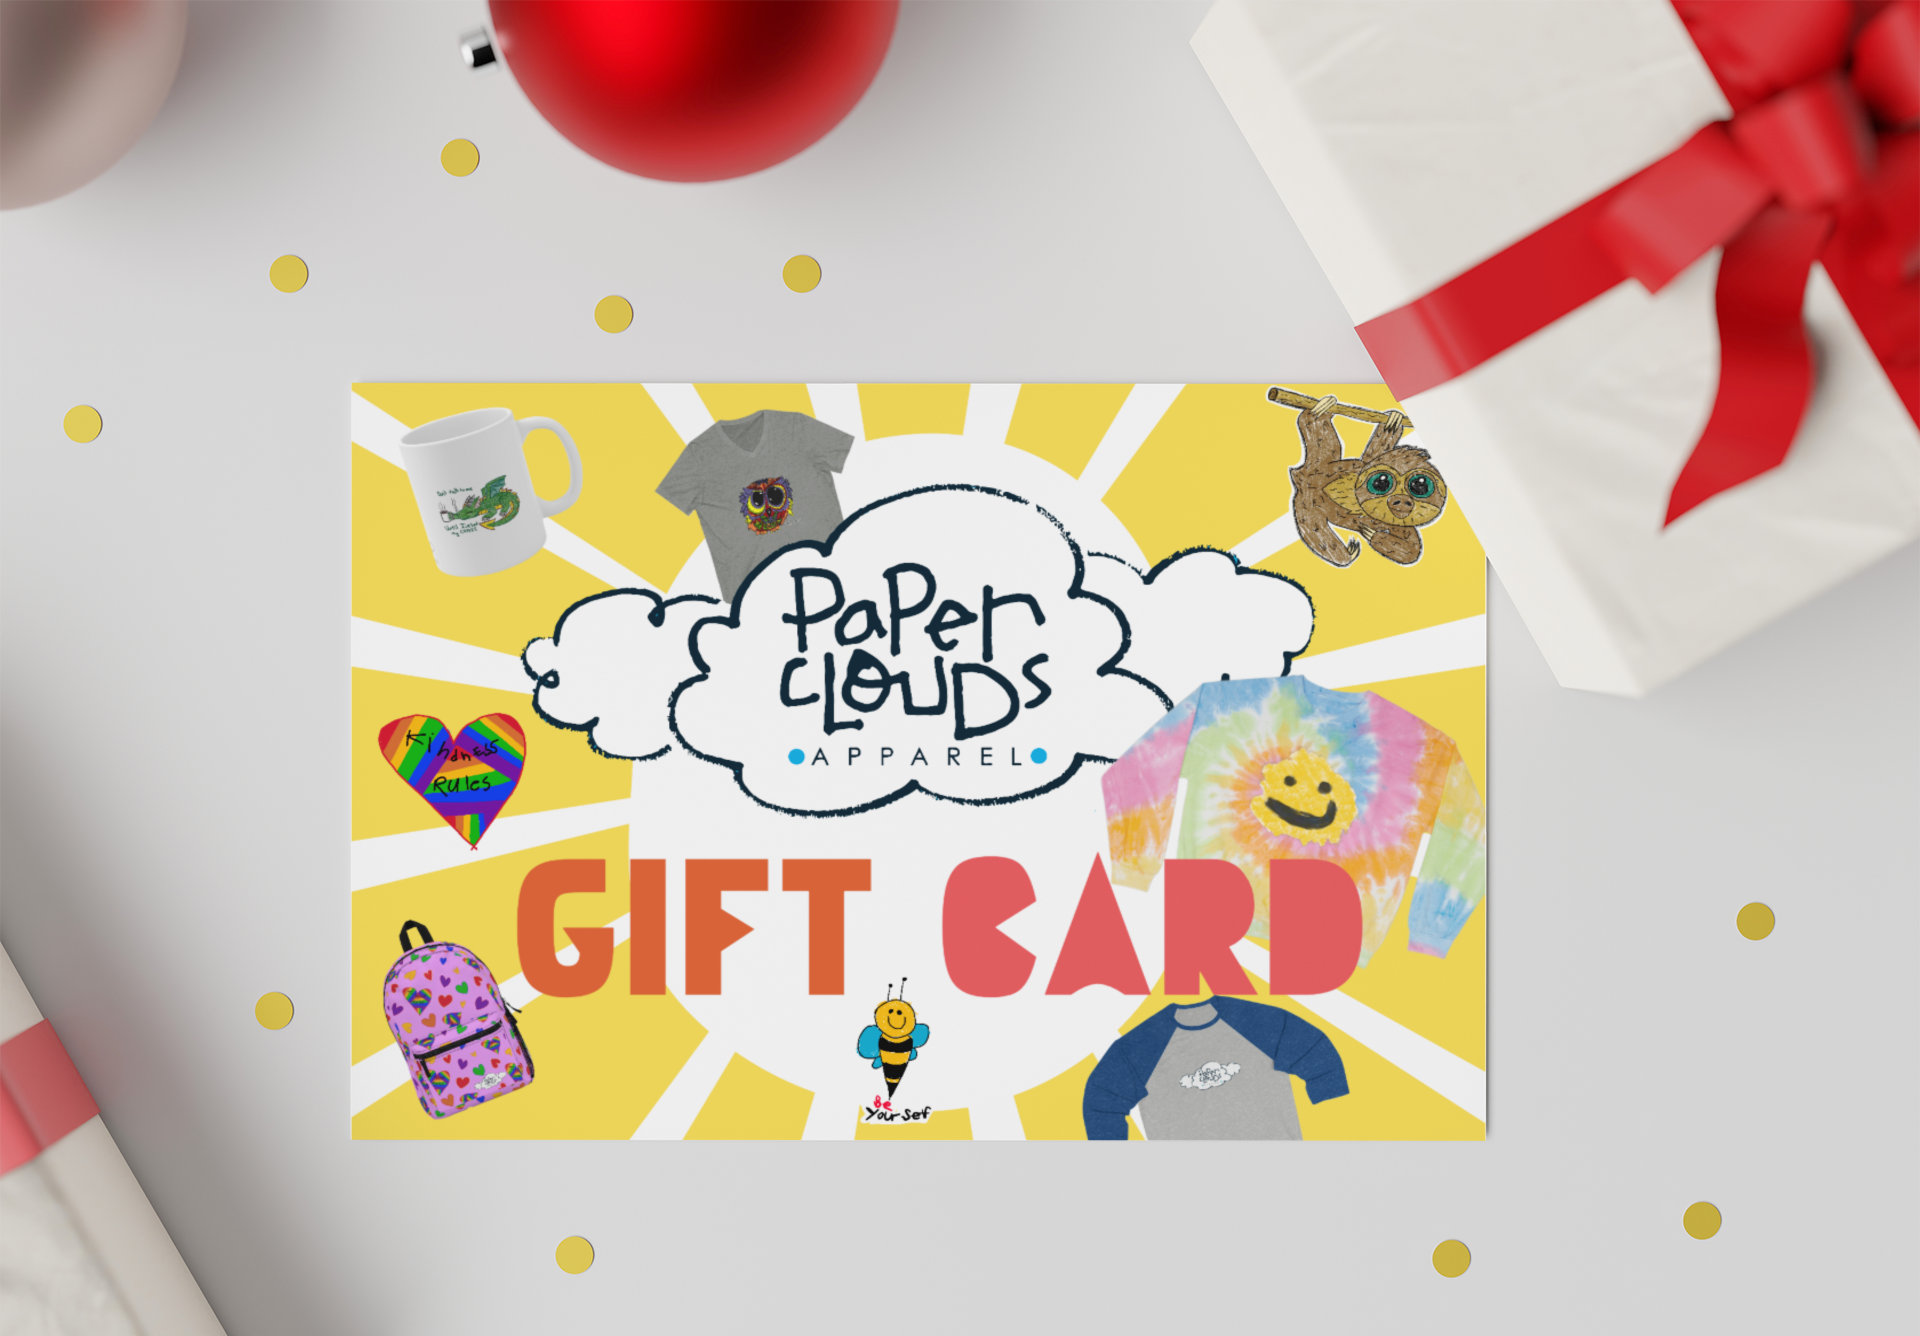 The Gift of Choice: Paper Clouds Apparel's New Gift Cards